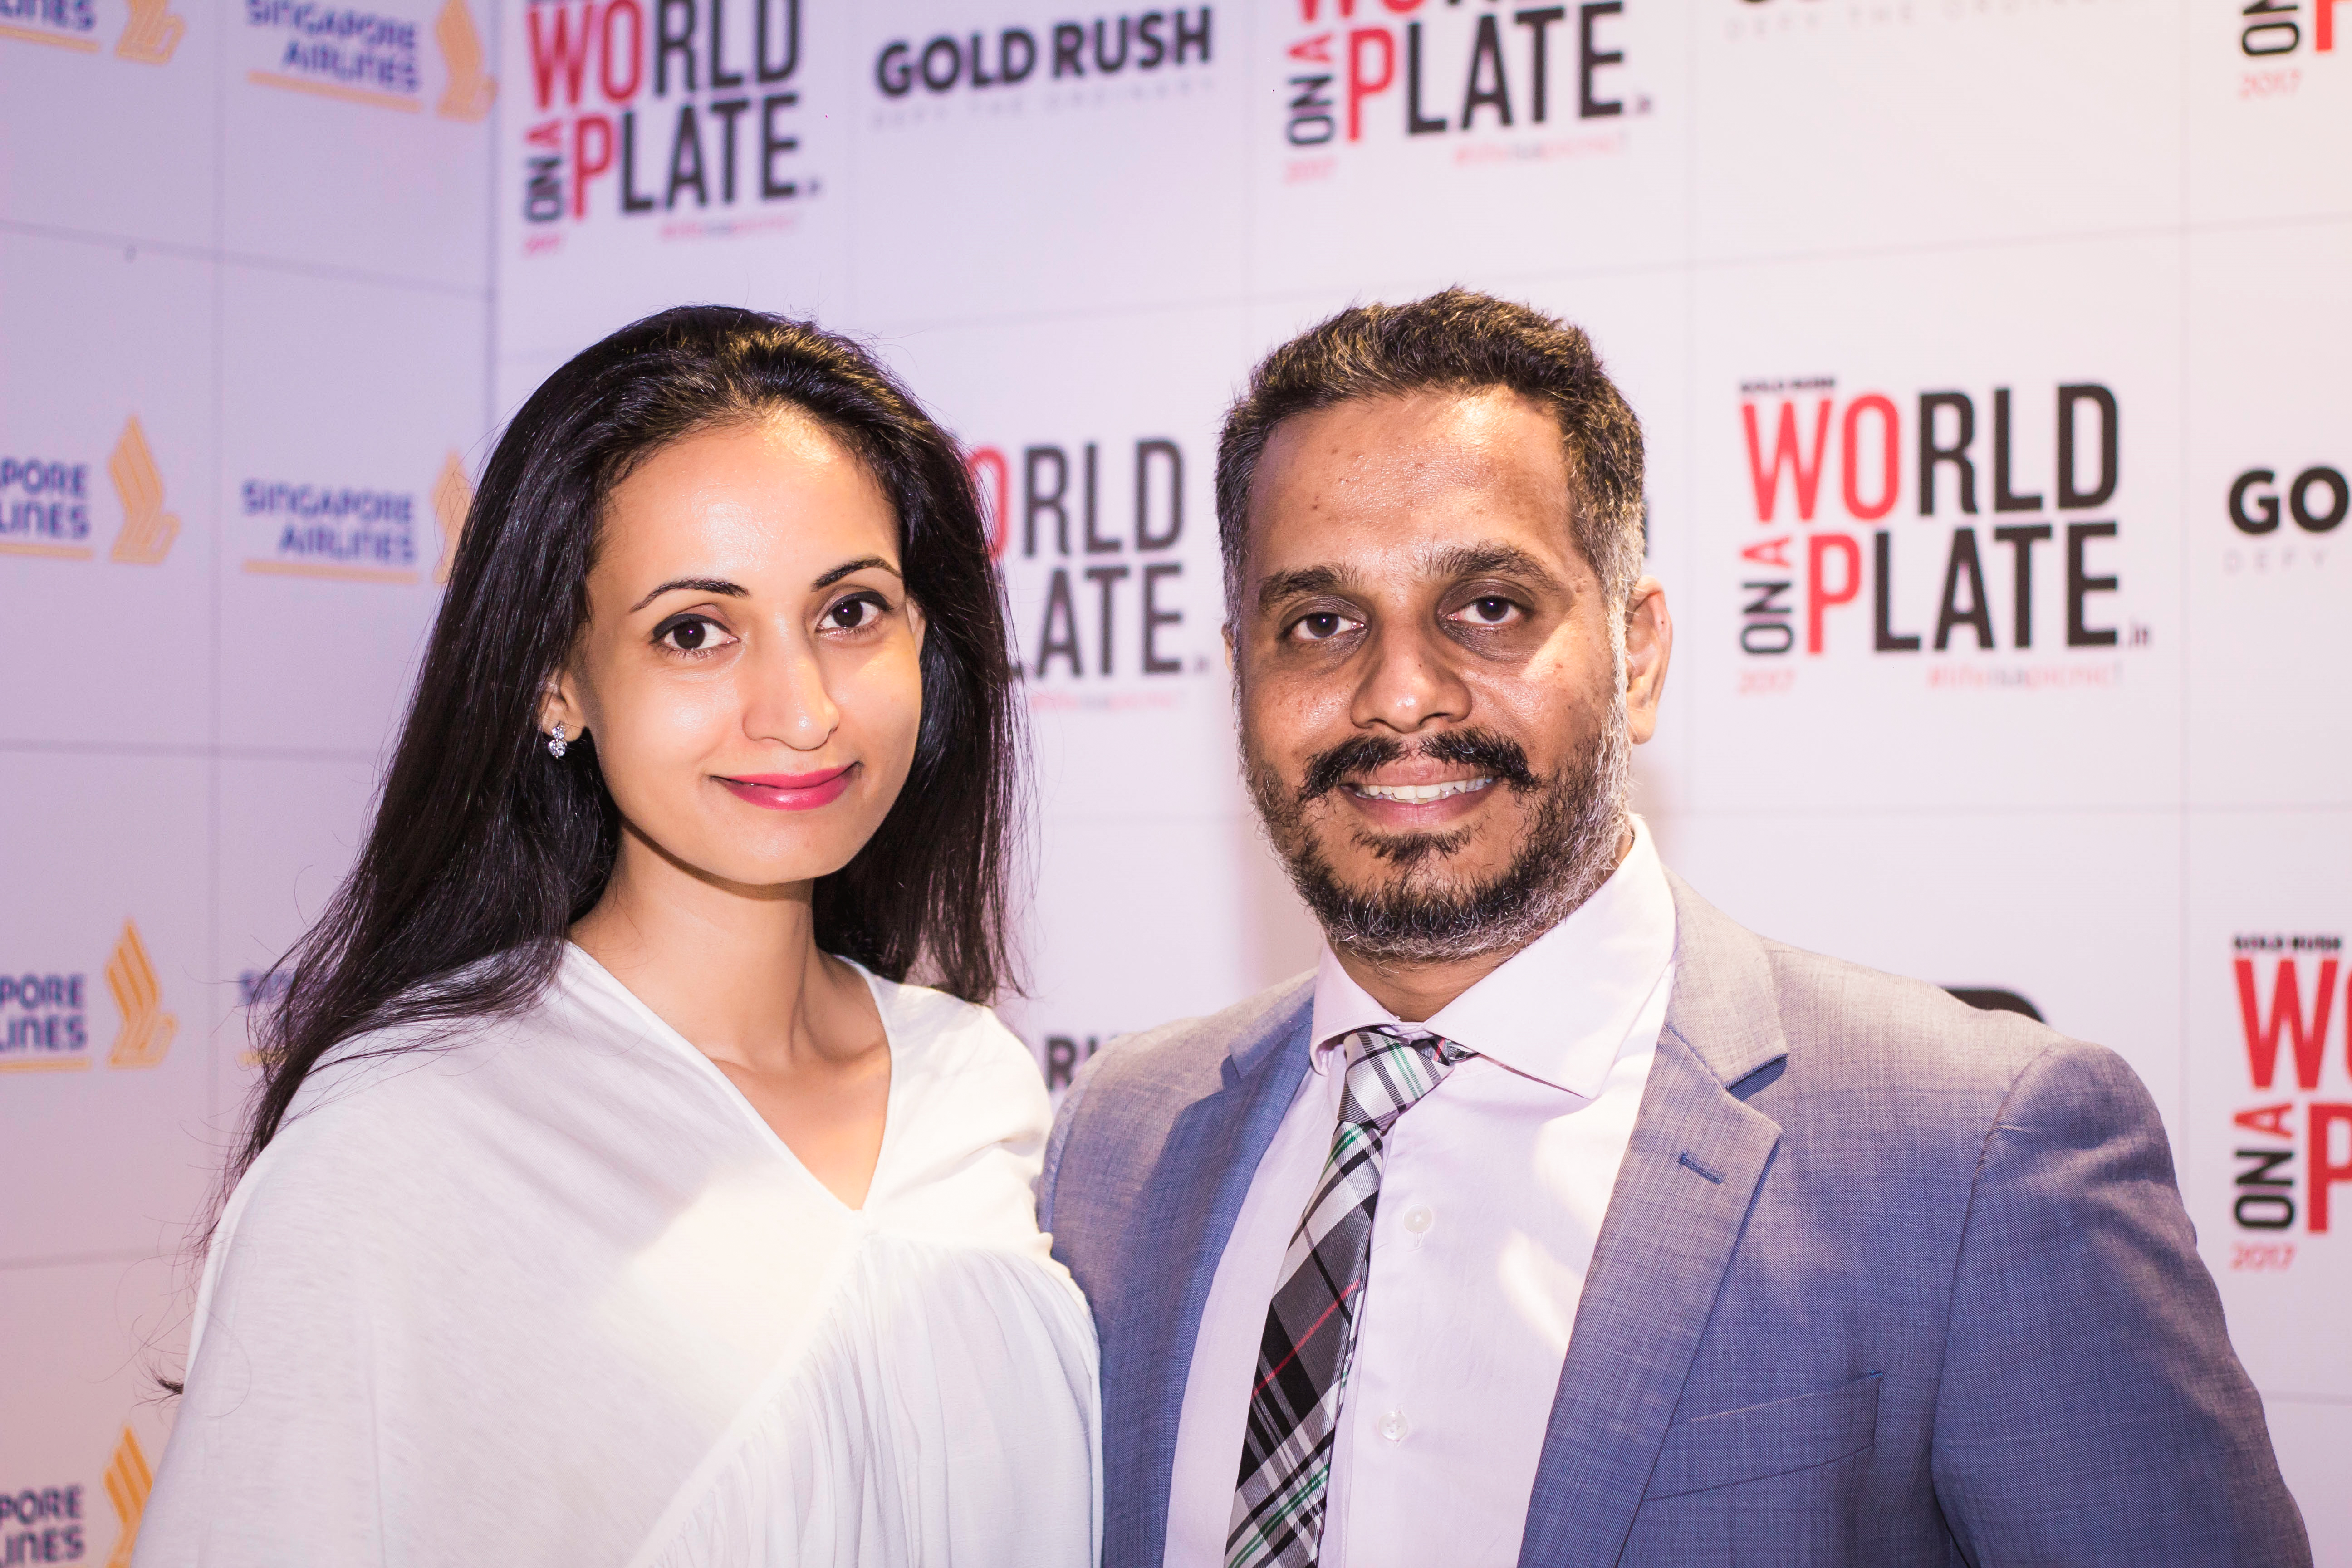 World On A Plate: A Treat To Your Palate By Culinary Experts